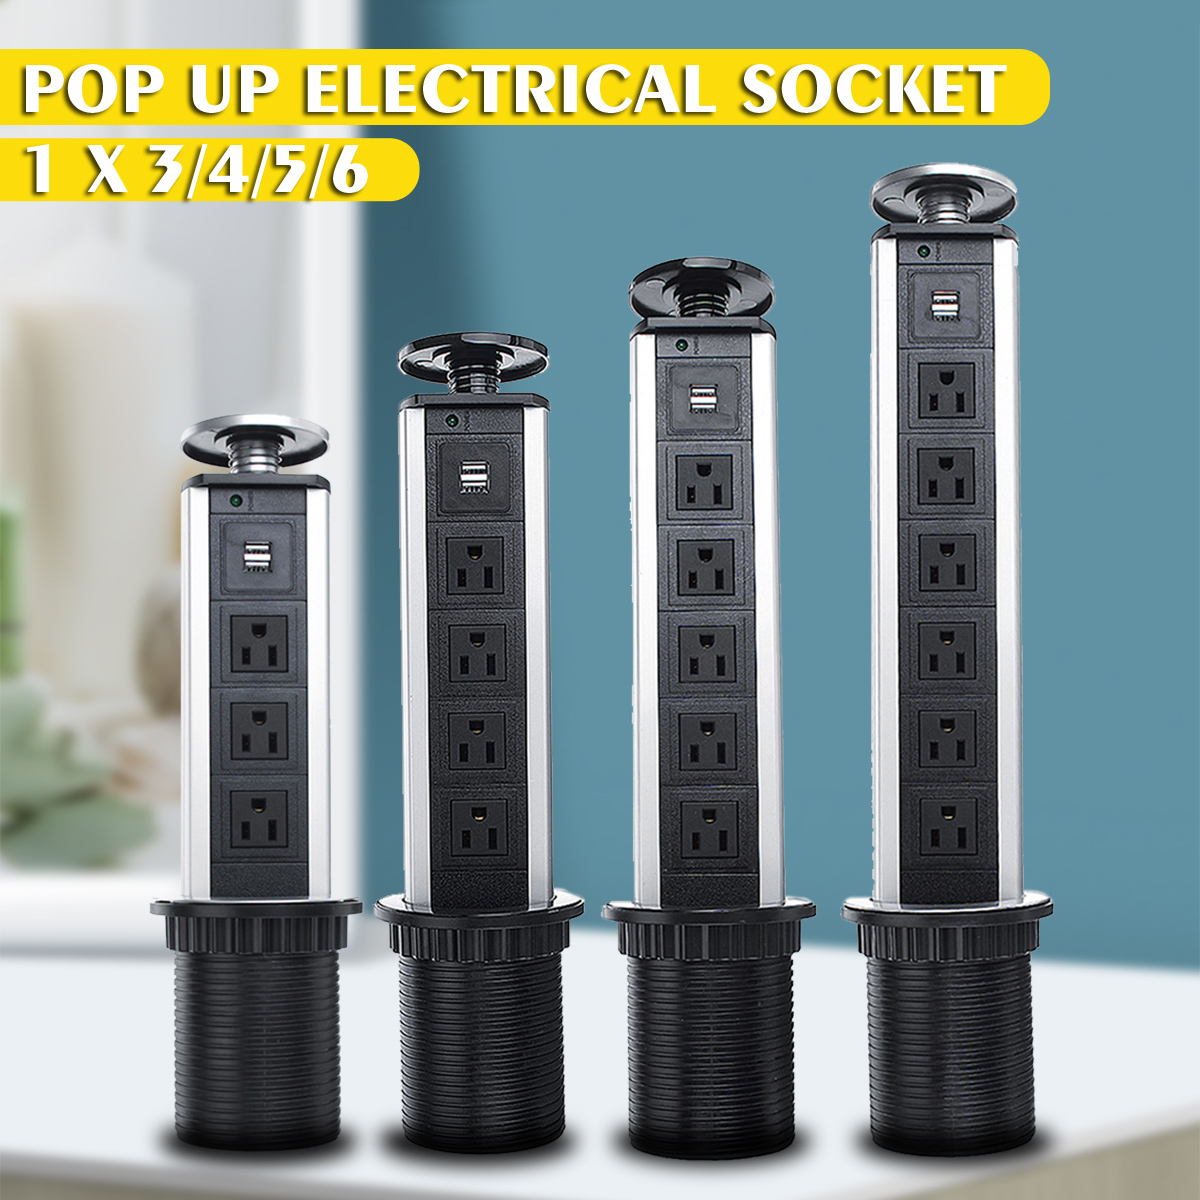 2500W-US-Plug-3456-Socket-Power-25A-USB-Charger-Hidden-Kitchen-Table-Electrical-Socket-1602744-1